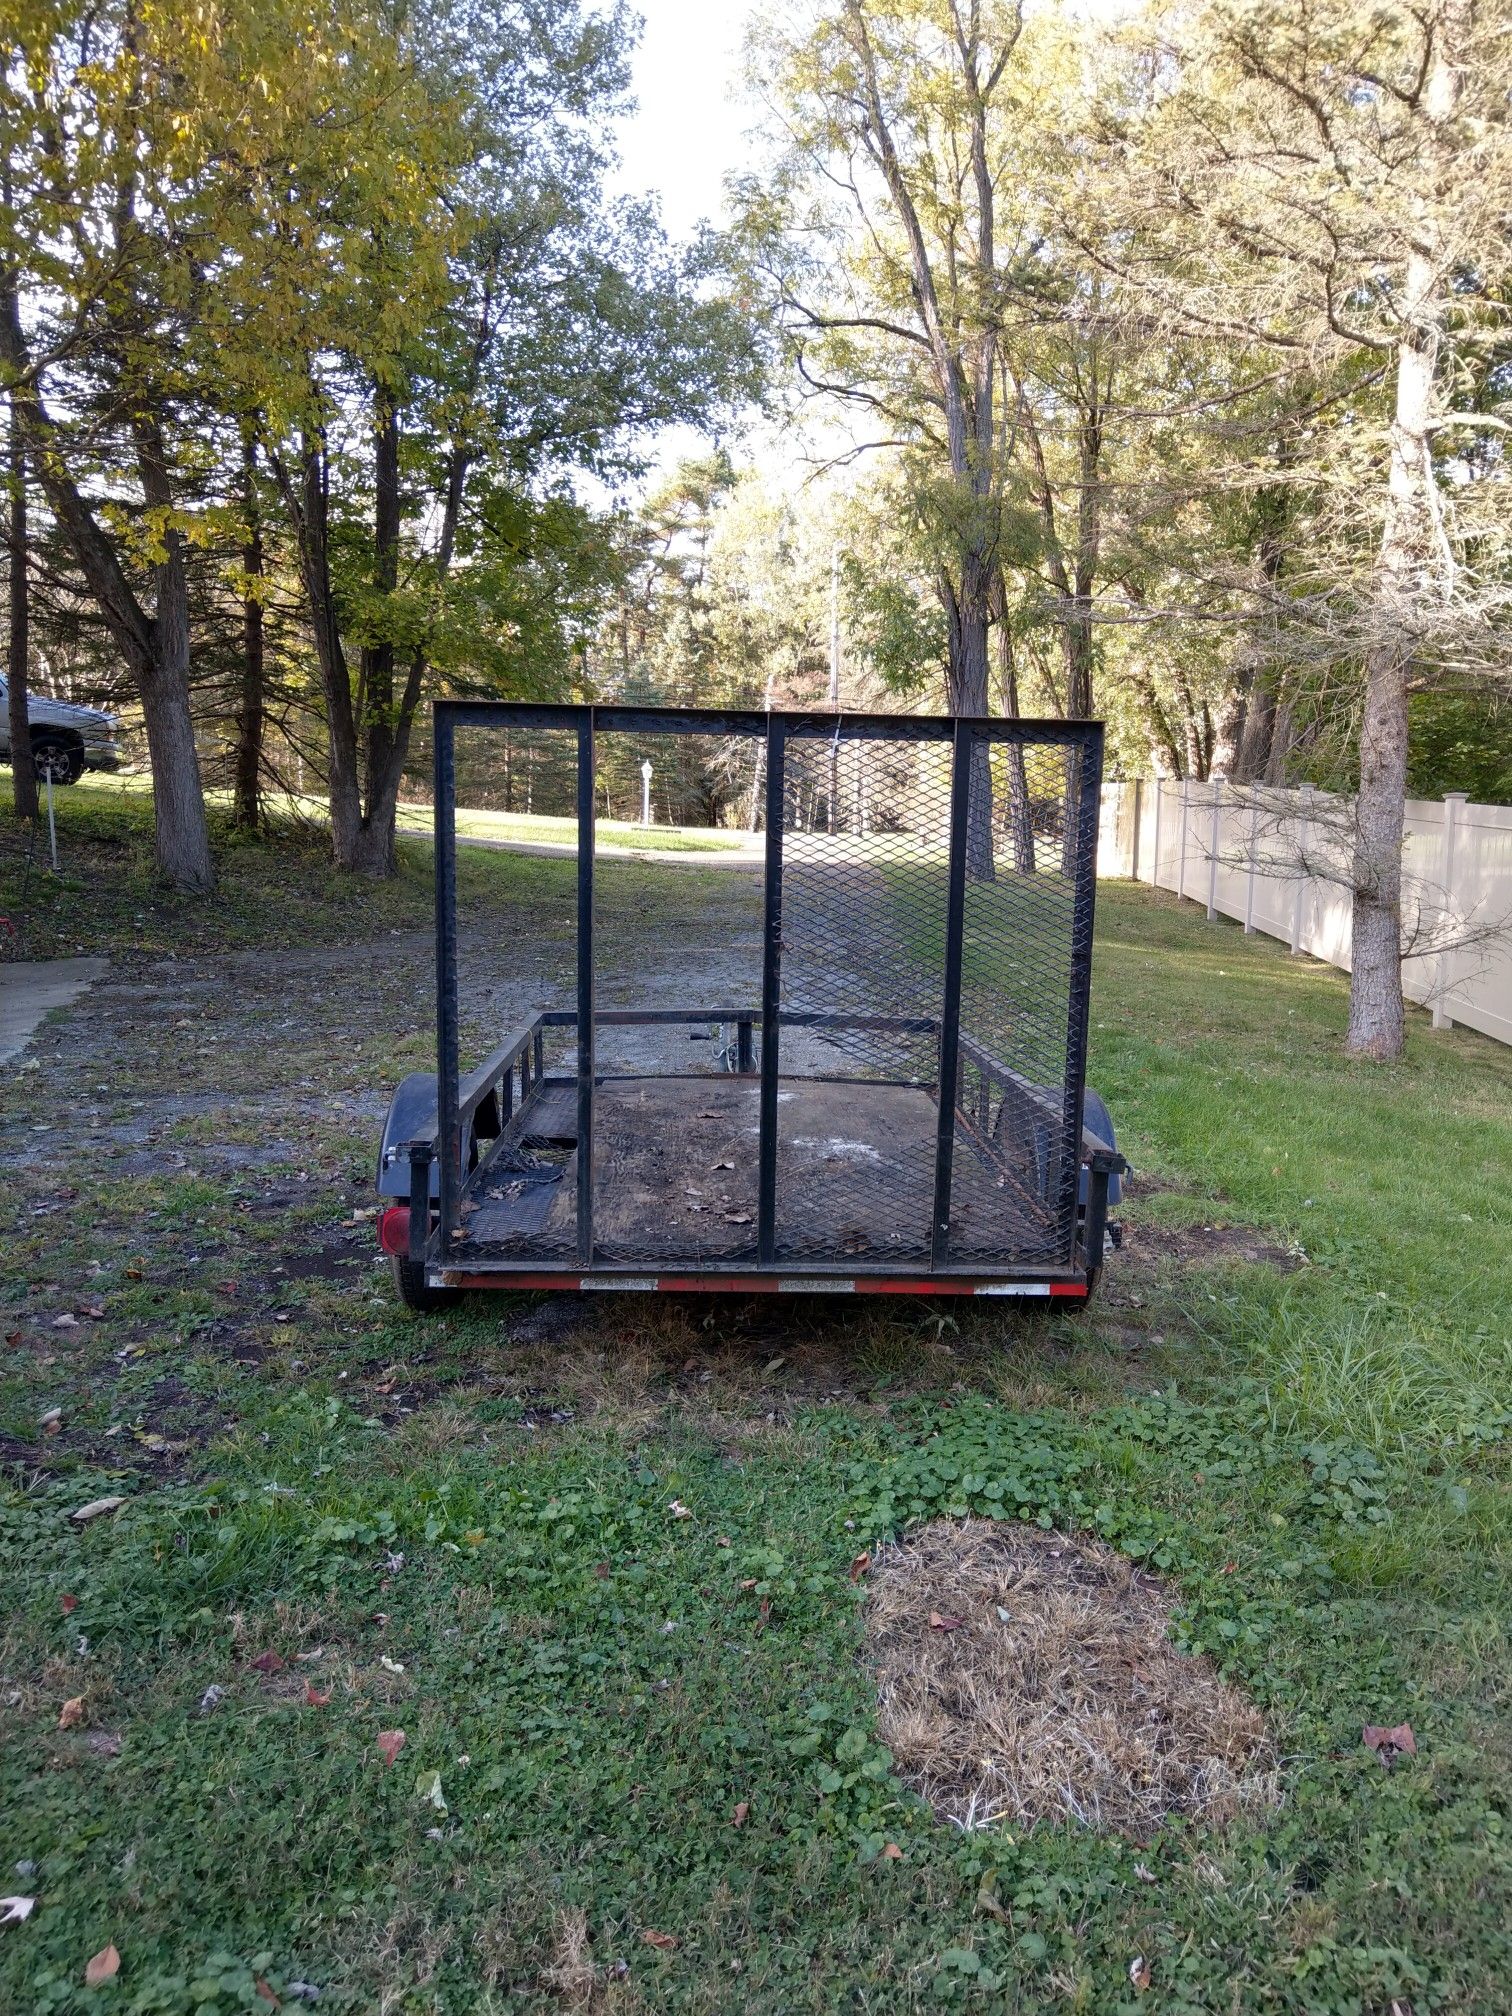 5'x 8' Trailer for sale as is...